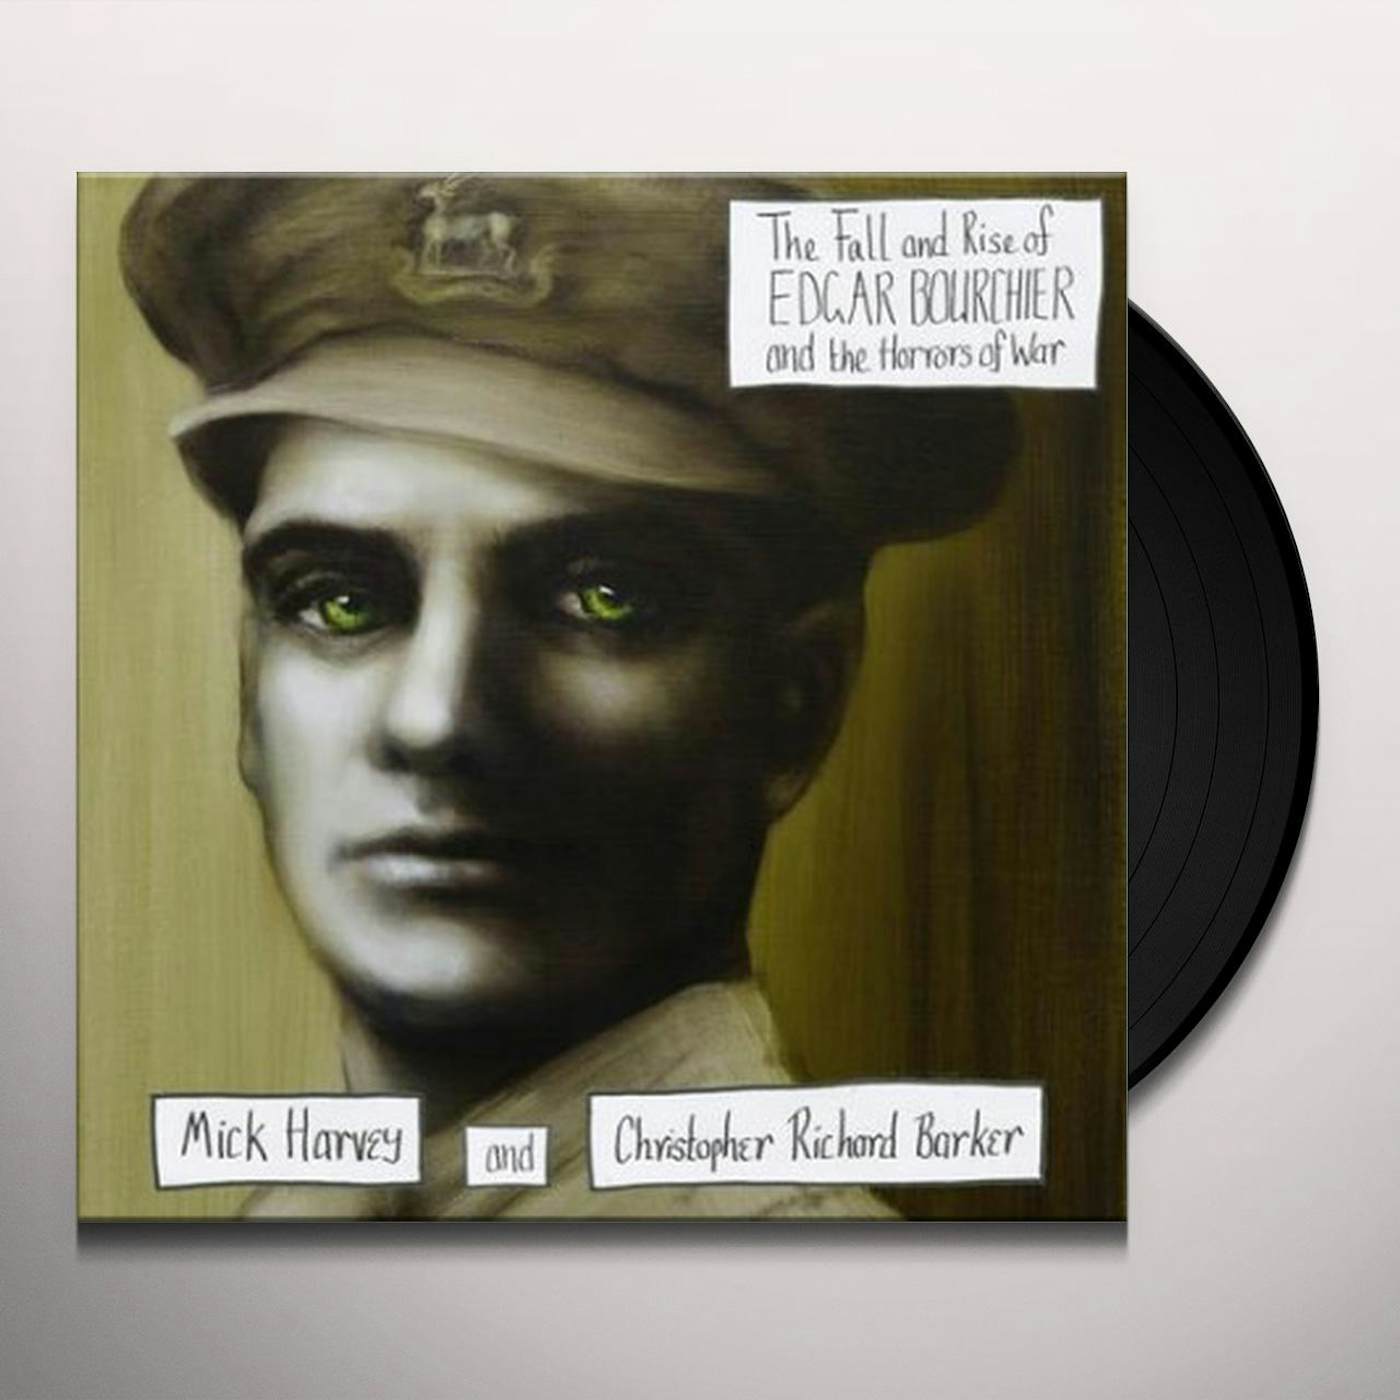 Mick Harvey FALL AND RISE OF EDGAR BOURCHIER & HORRORS OF WAR Vinyl Record